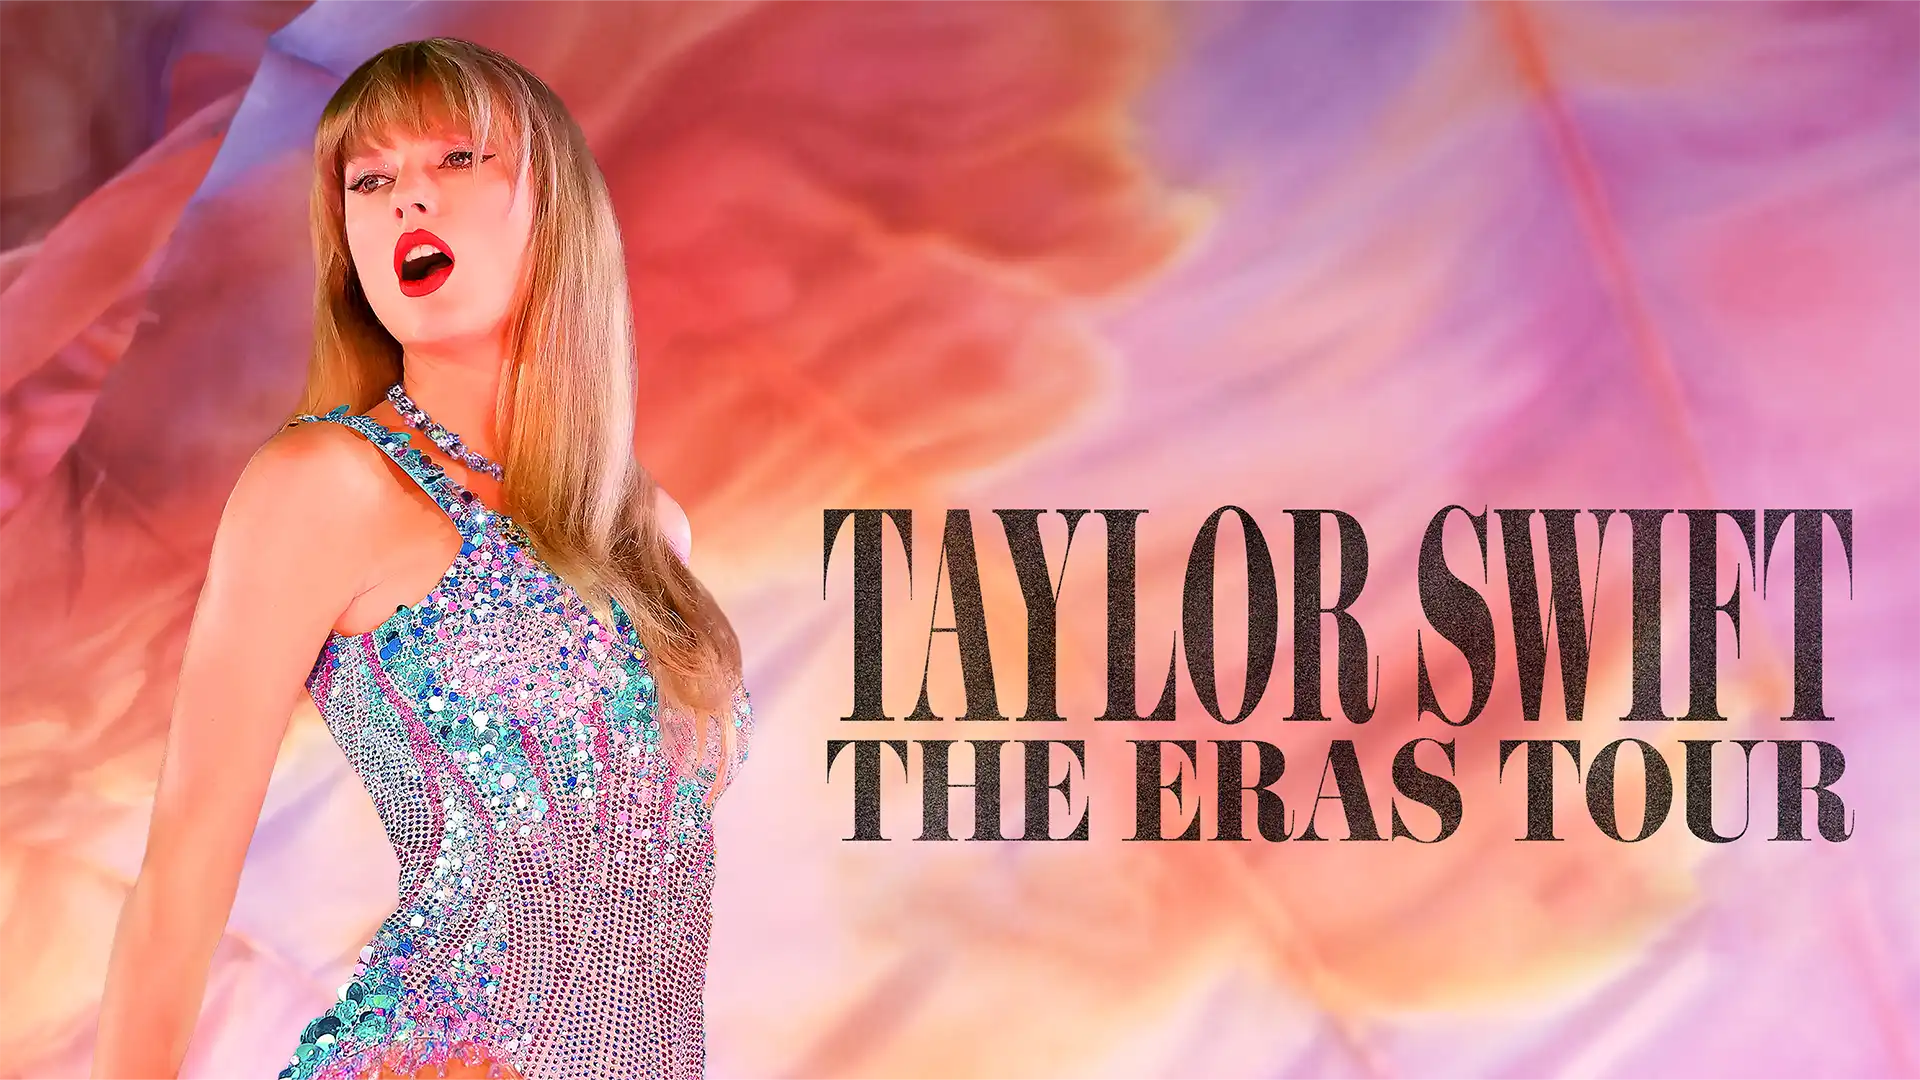 Image of Taylor Swift with pink and purple clouds in background. Text reads Taylor Swift The Eras Tour